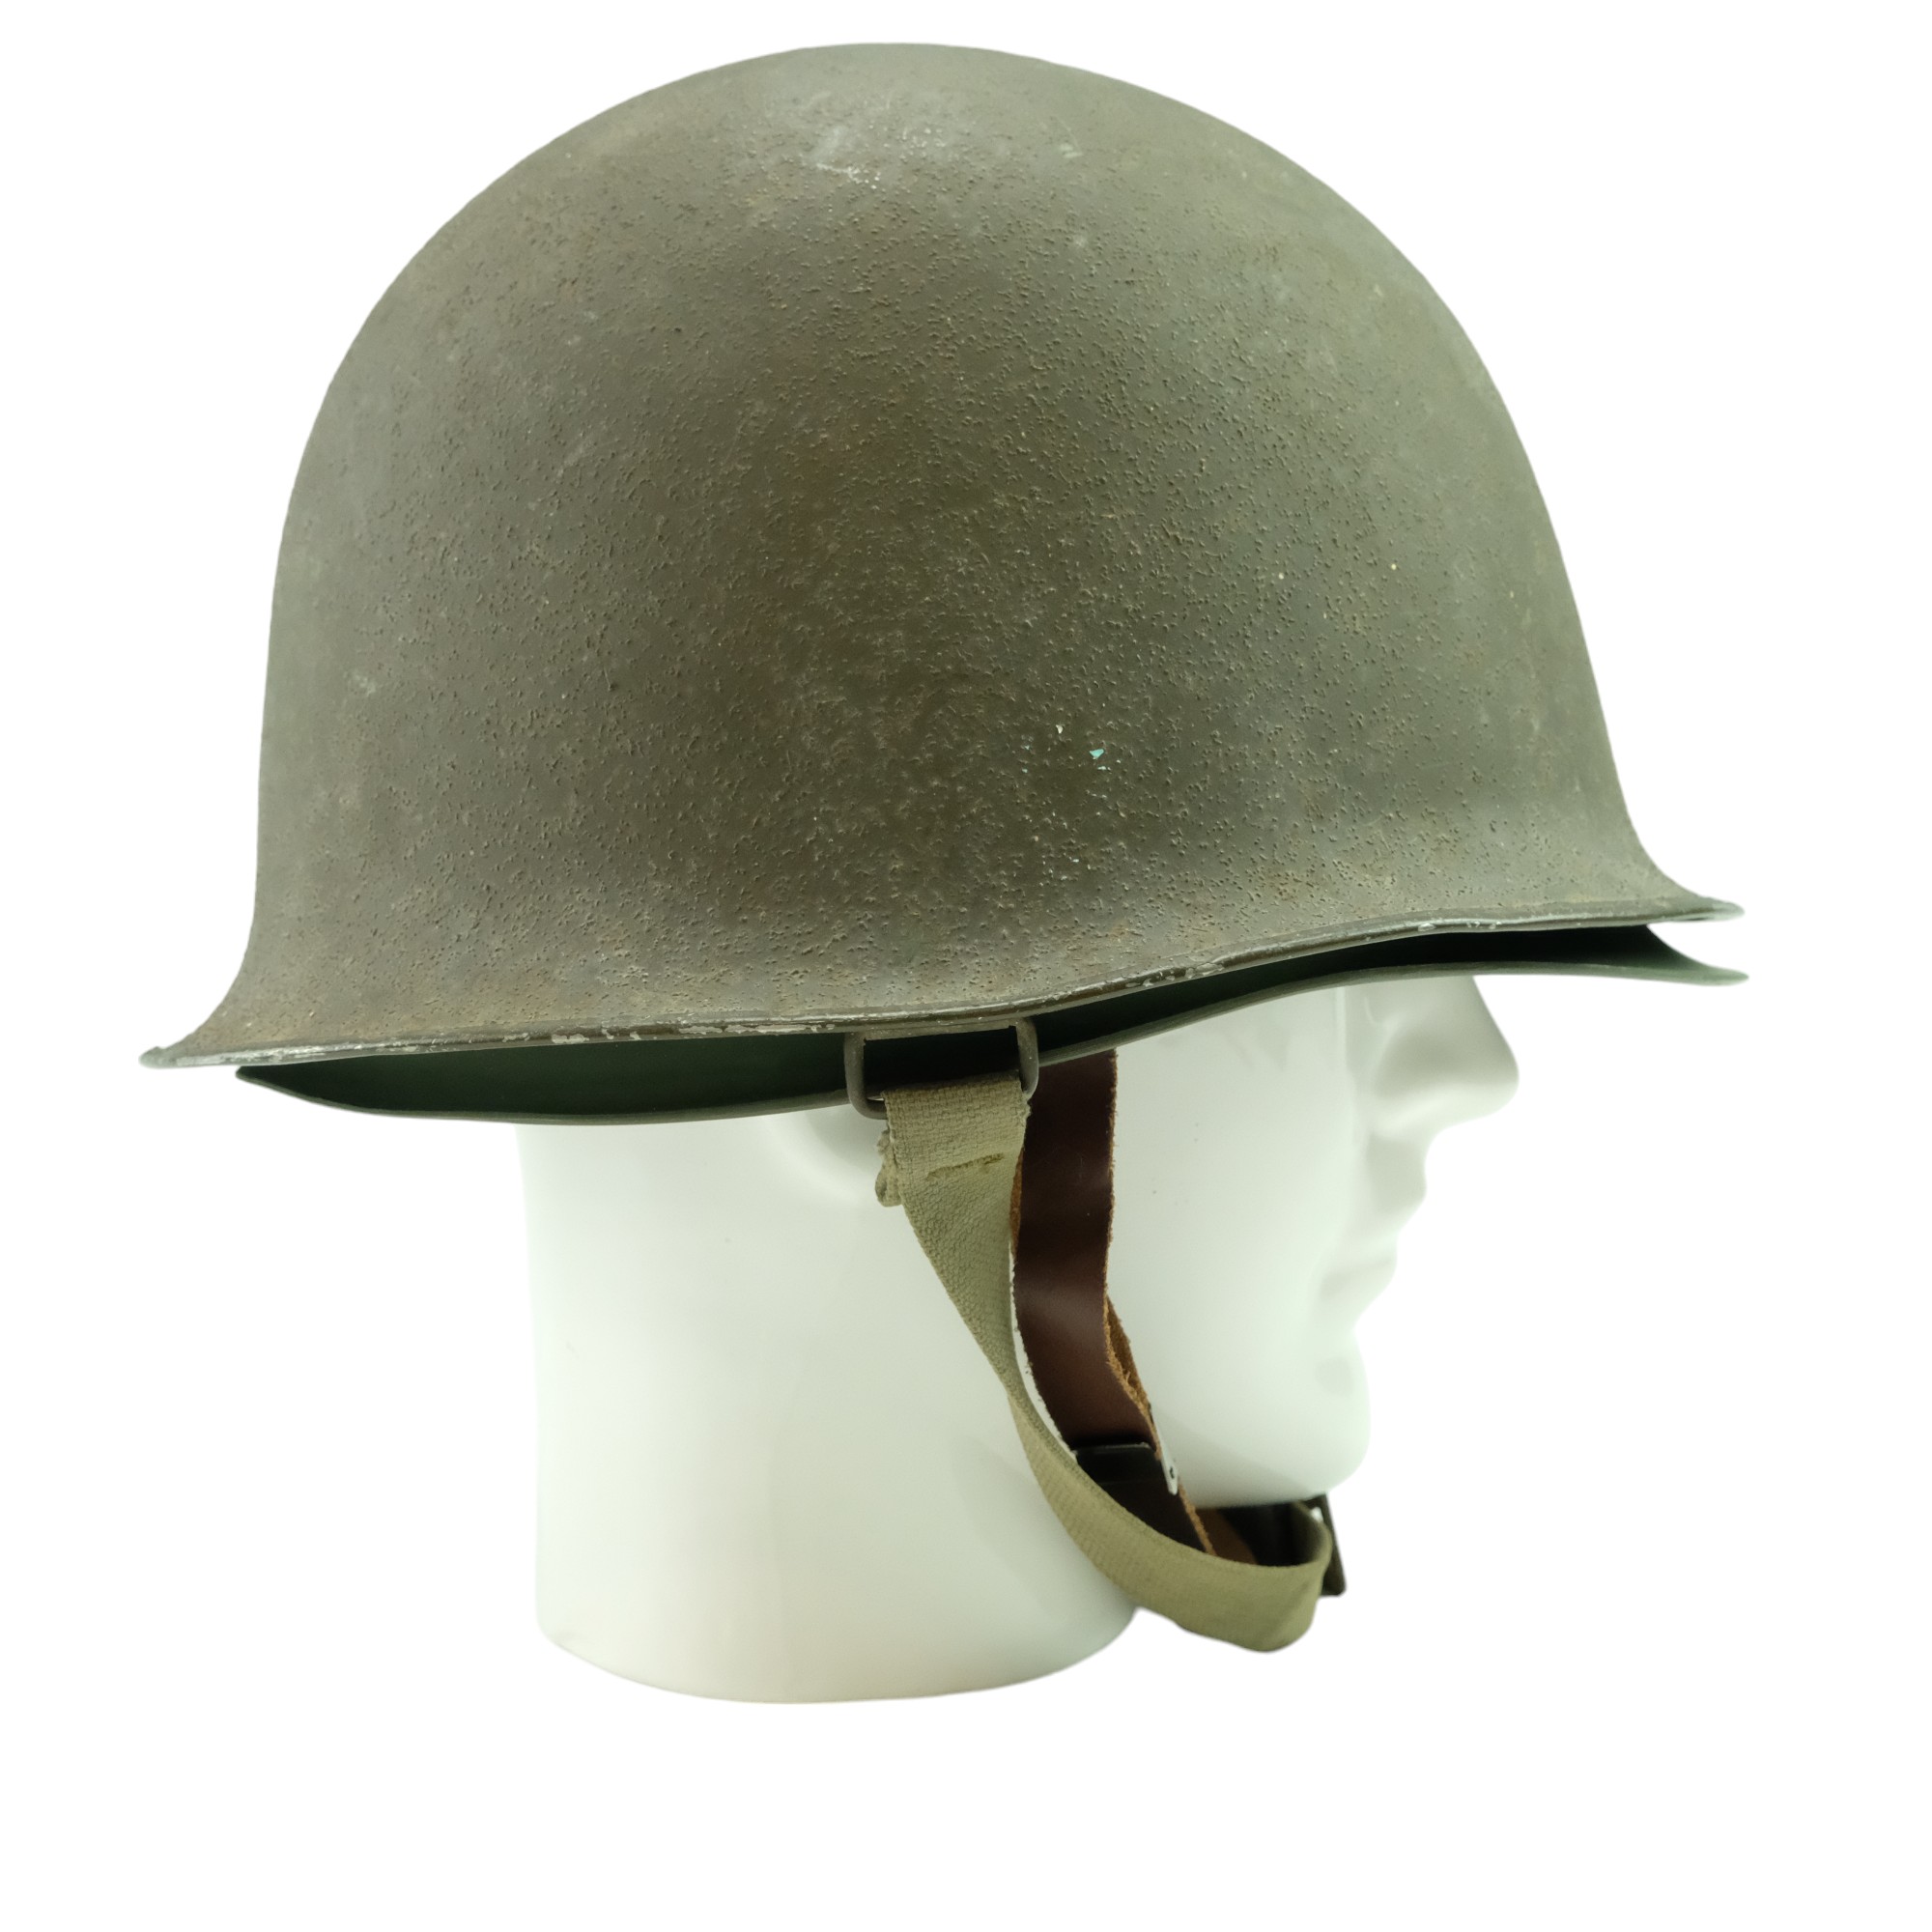 A French M1 style Helmet - Image 5 of 7